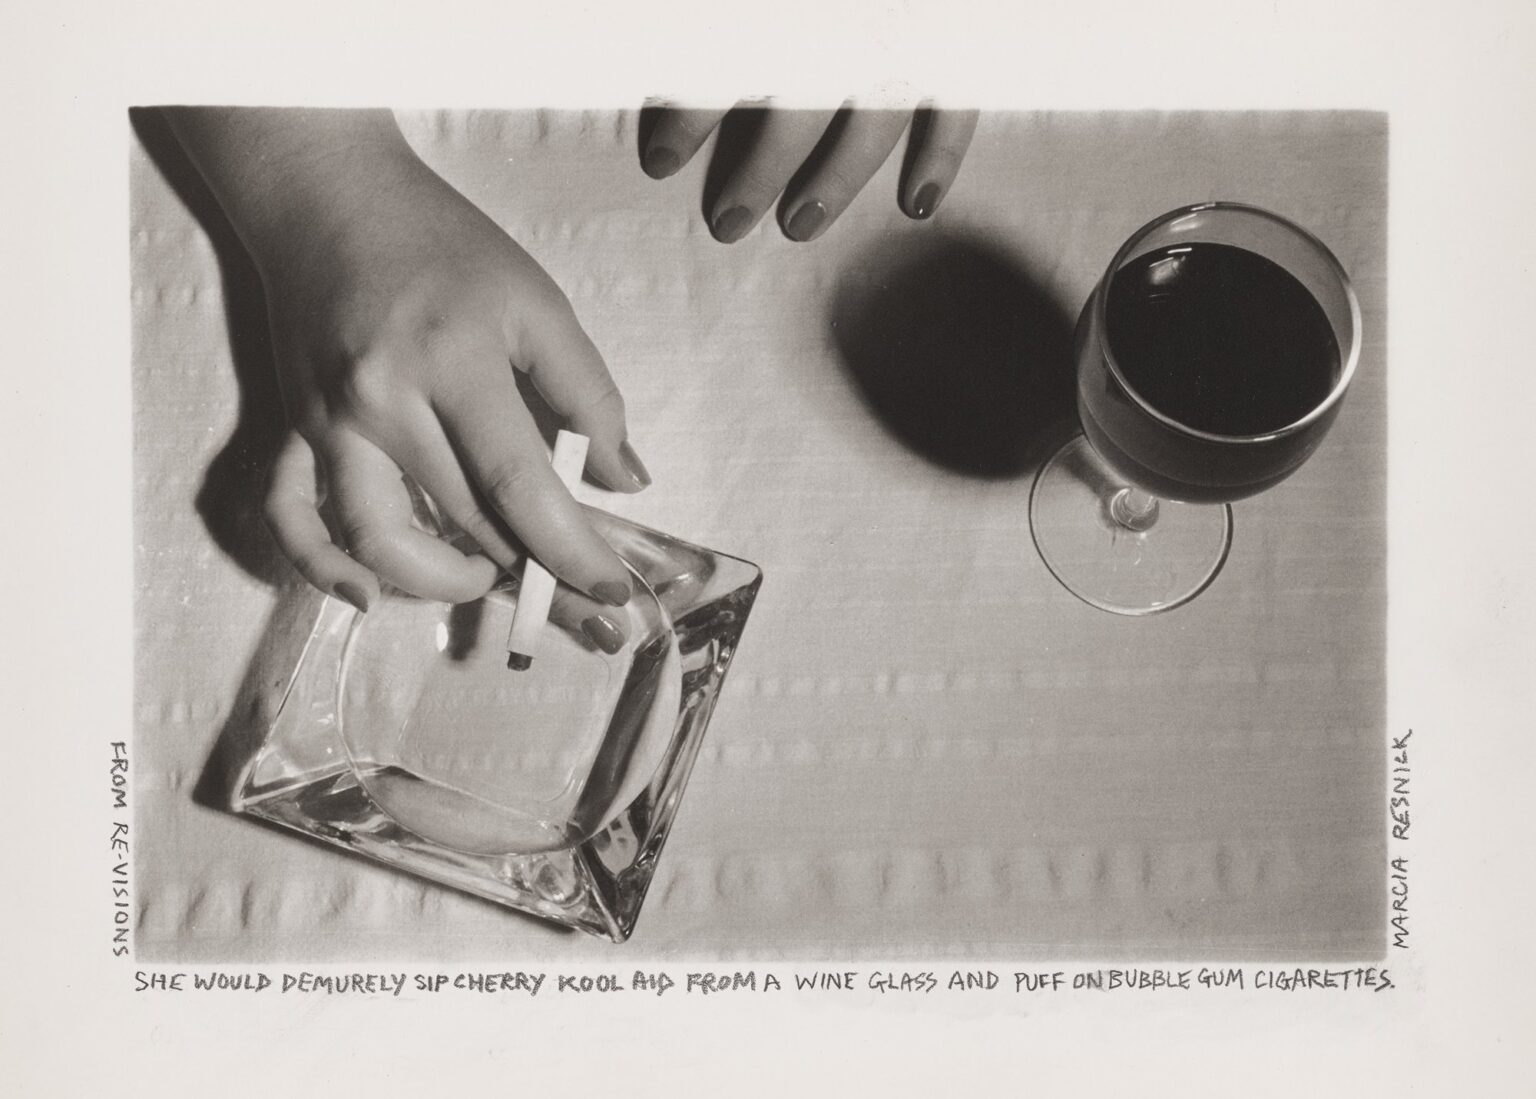 A black-and-white photograph depicts two hands on a dinner table, seen from above. One is holding a cigarette above a glass ashtray, and one is resting next to a full wine glass. Underneath the photograph, the text “She Would Demurely Sip Cherry Kool Aid From a Wine Glass and Puff on Bubble Gum Cigarettes” is written in pencil.